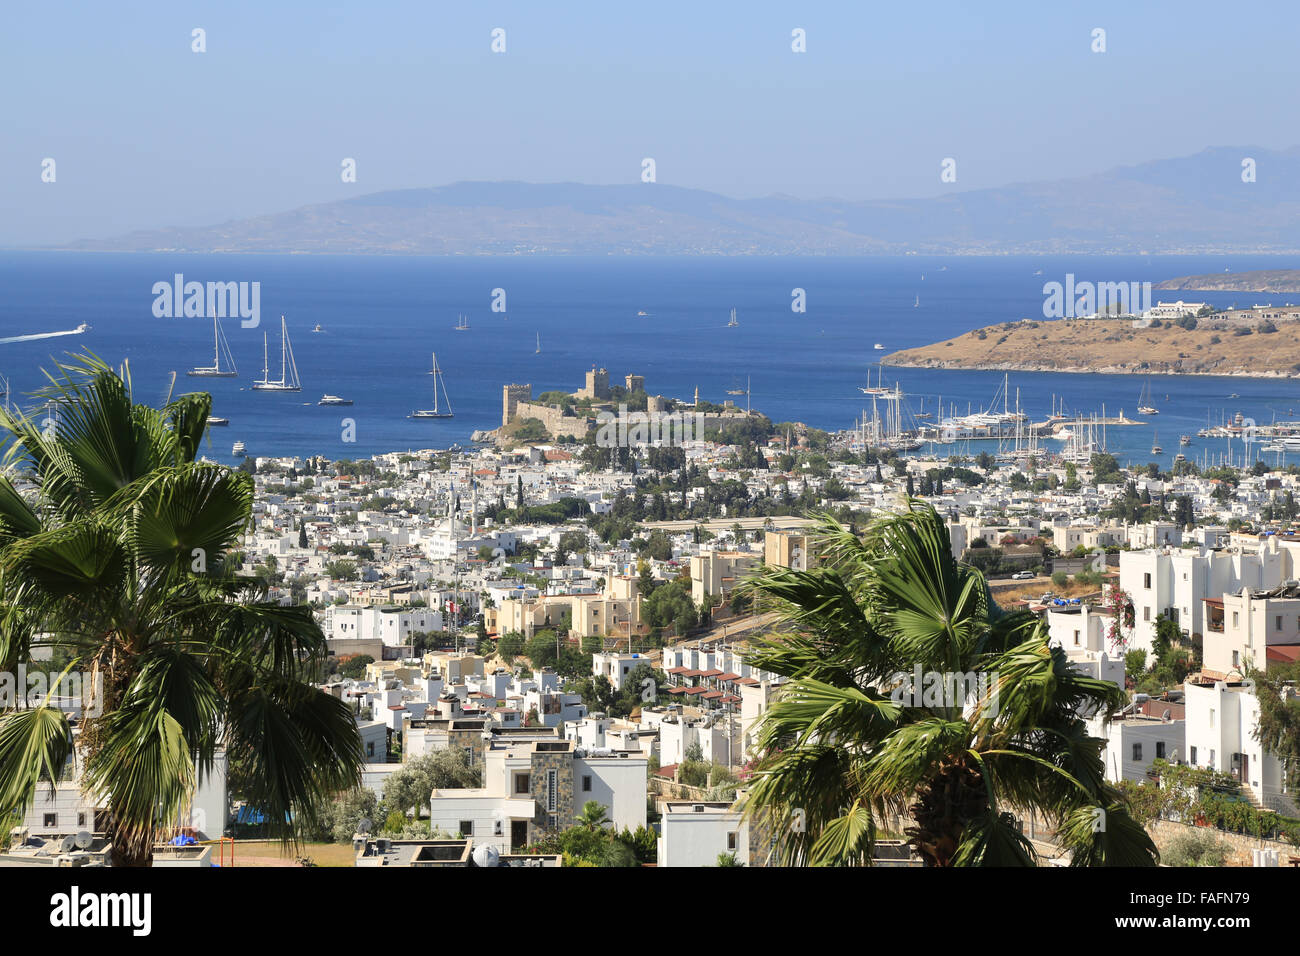 View across sea Bodrum Bay town, castle and harbour harbor port in Turkey from hillside in Summer sunshine Stock Photo